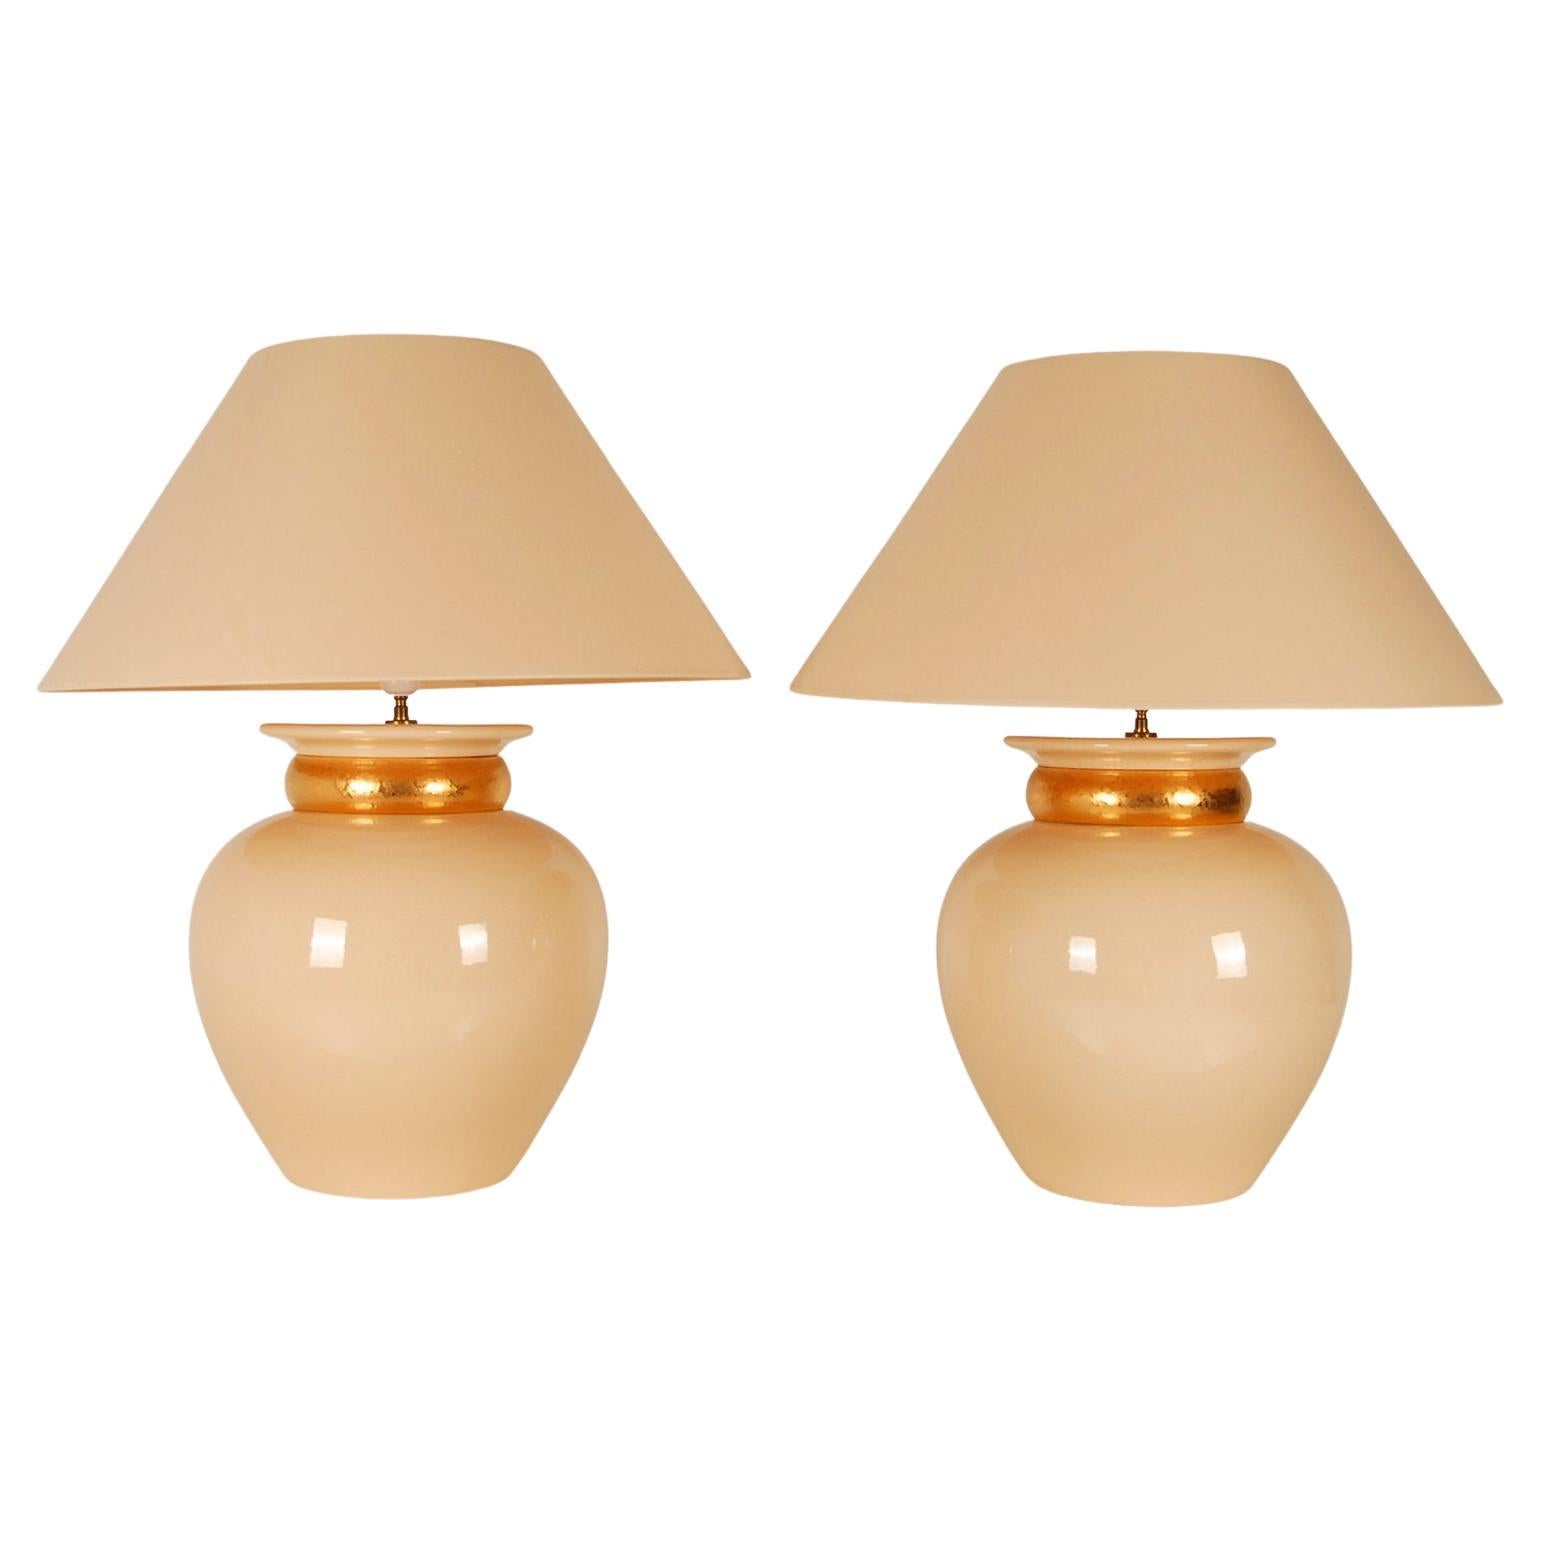 Vintage French Ceramic Robert Kostka Table Lamps Gold and Beige  - a Pair For Sale